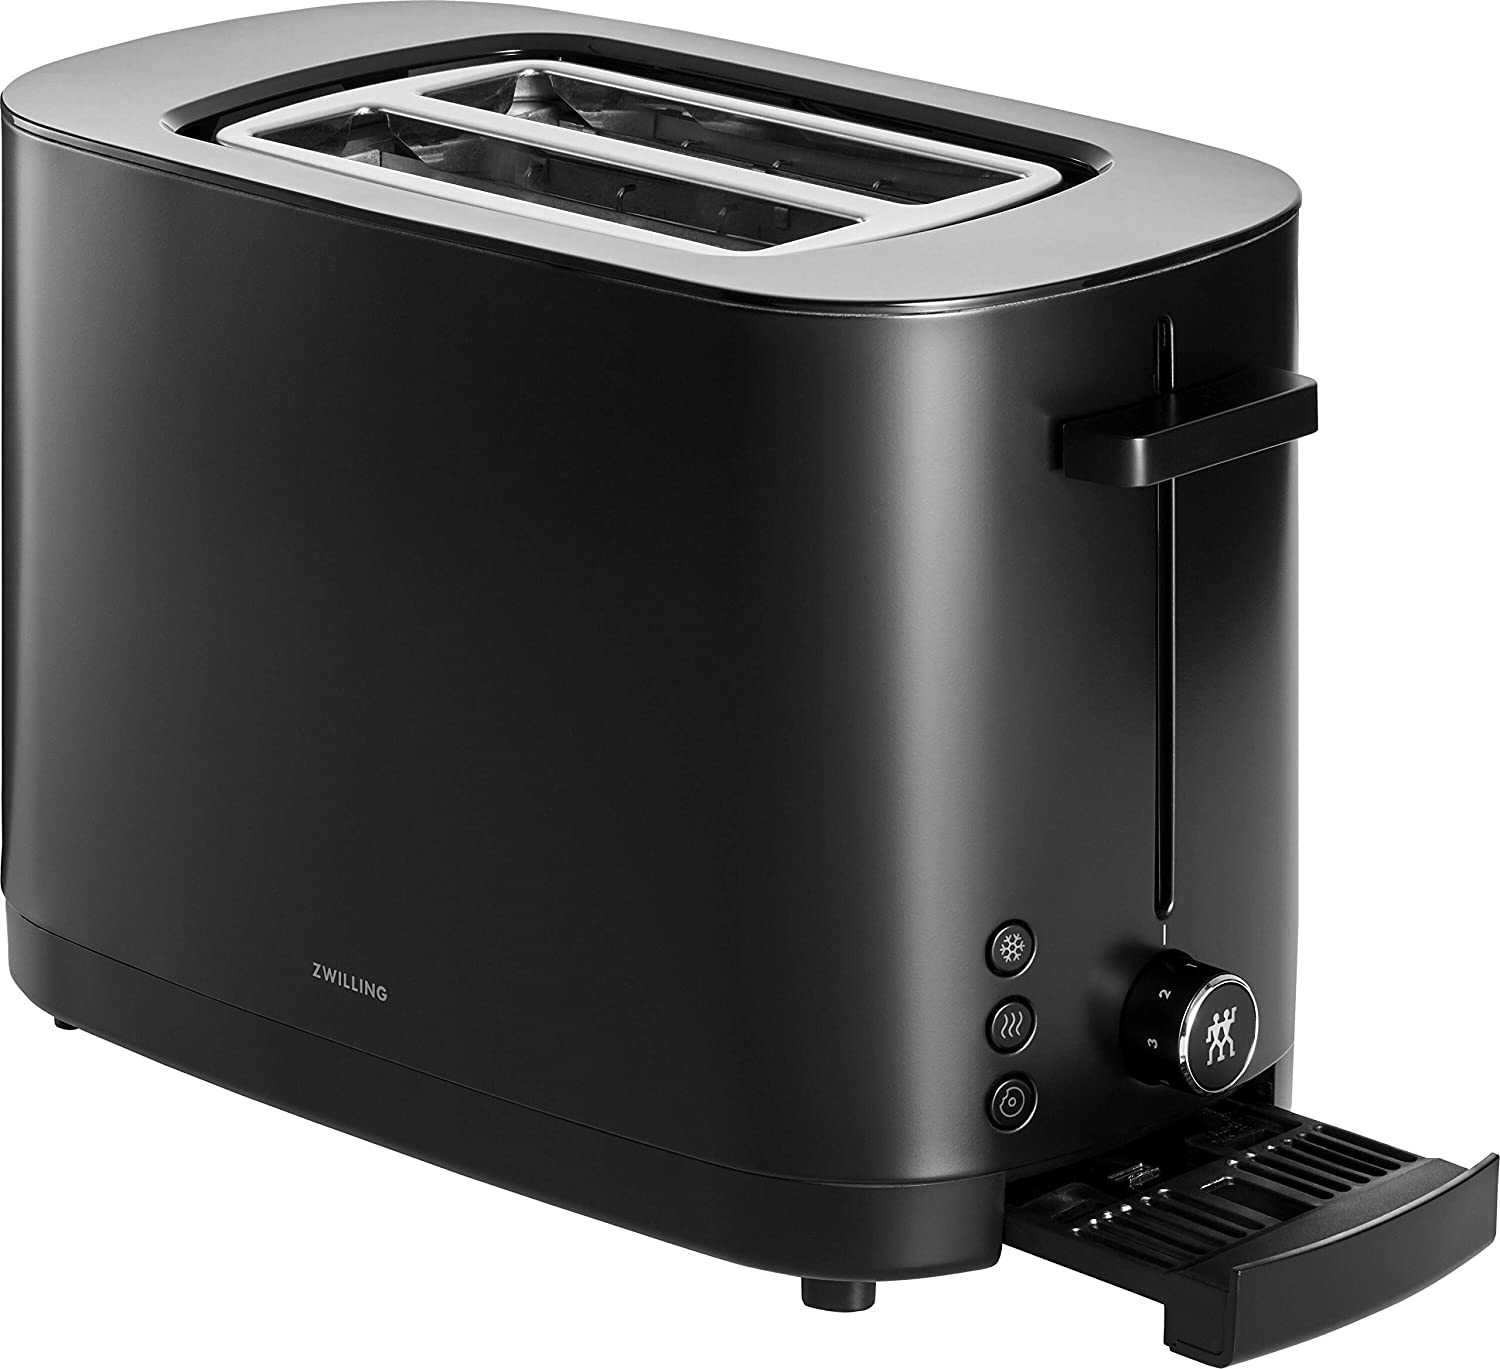 Zwilling Enfinigy 2 Compartment Toaster, Black